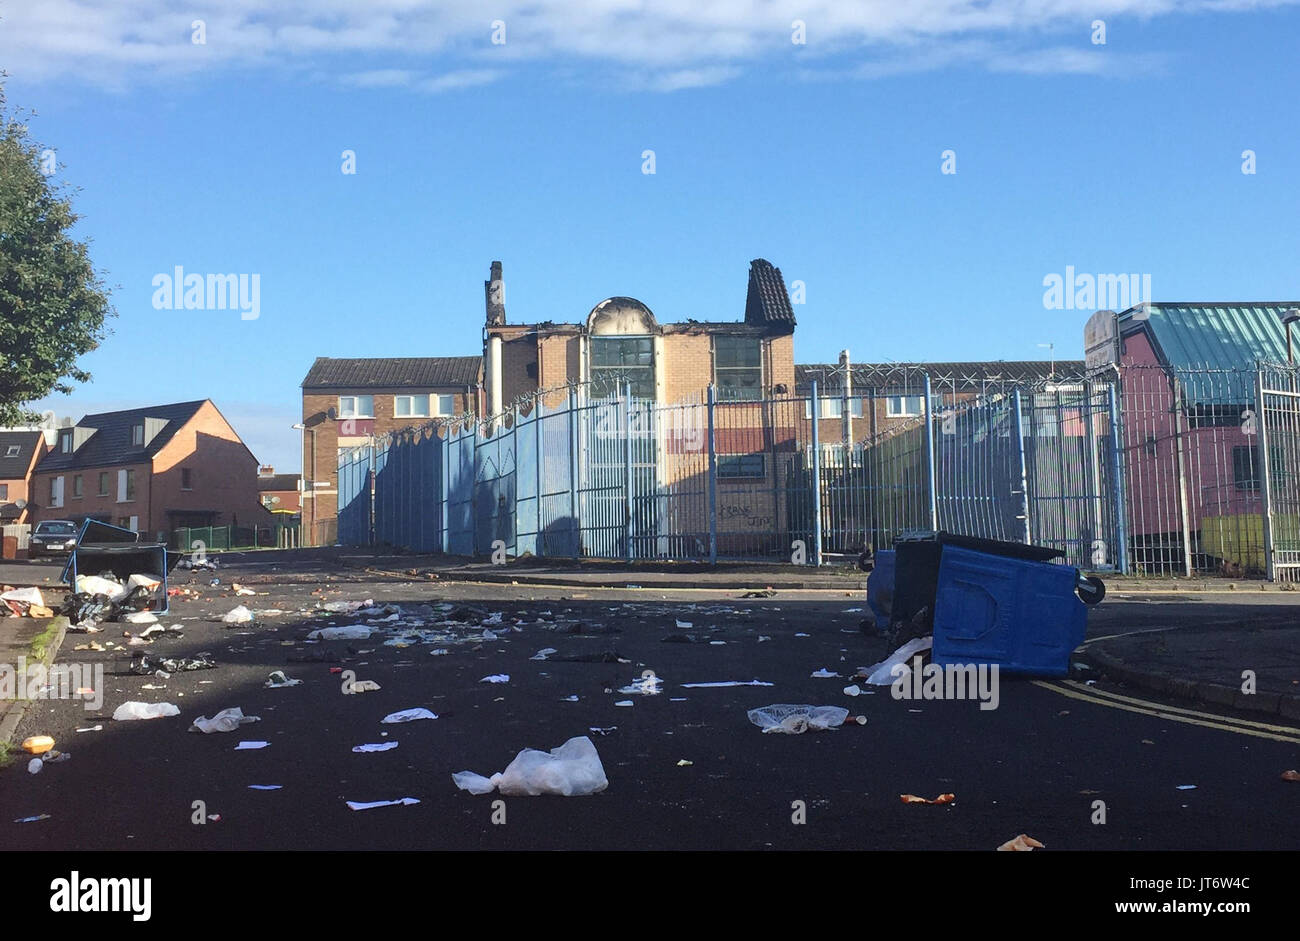 RETRANSMITTED CHANGING LOCATION FROM MARKETS AREA TO DIVIS AREA General view of the Divis area of Belfast, where Police have been attacked and cars torched by masked youths apparently angered by the removal of wood from the site of a nationalist bonfire in Belfast. Stock Photo